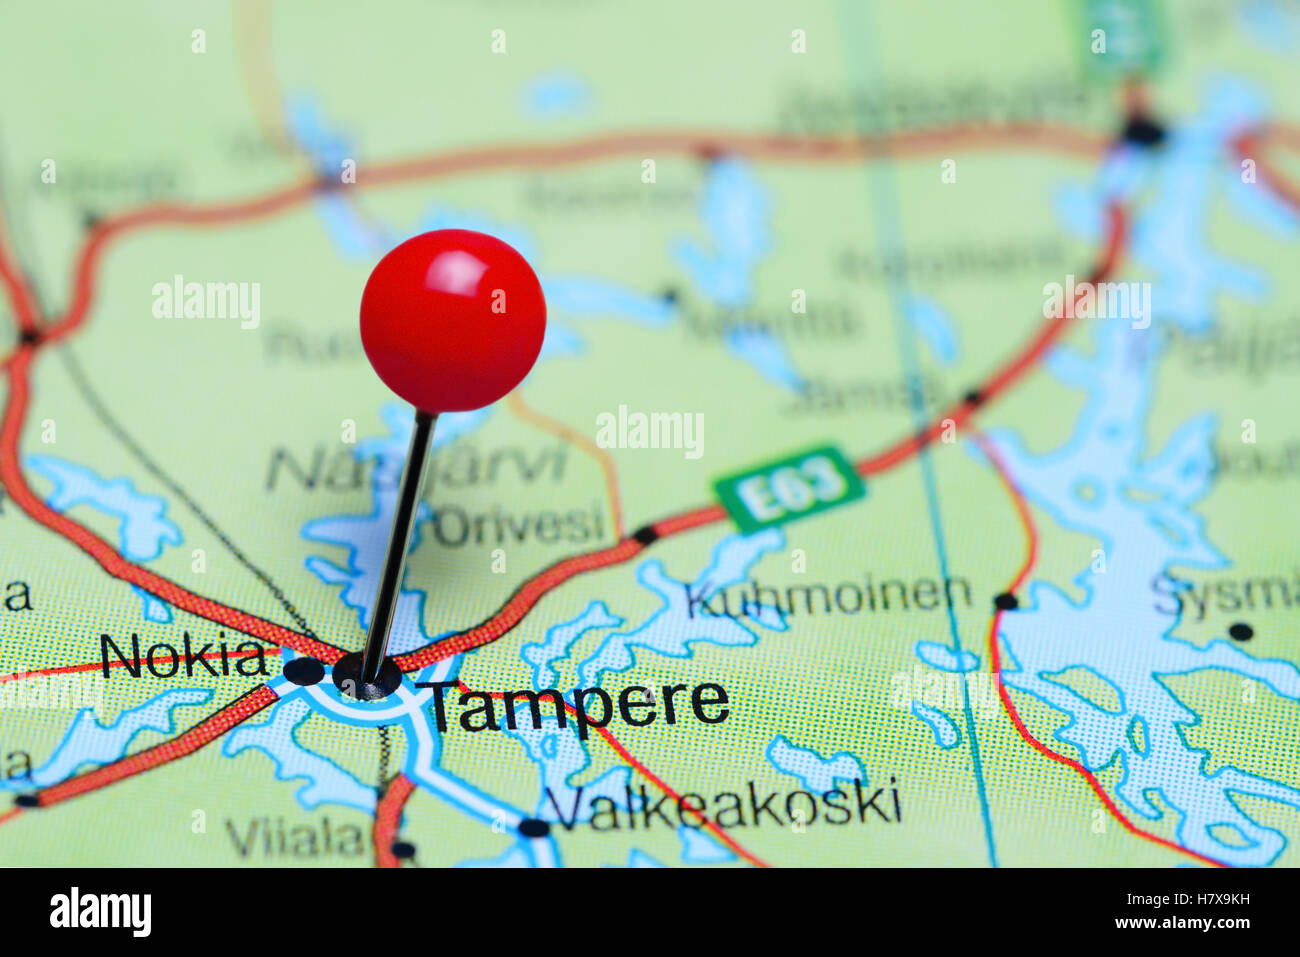 Tampere pinned on a map of Finland Stock Photo